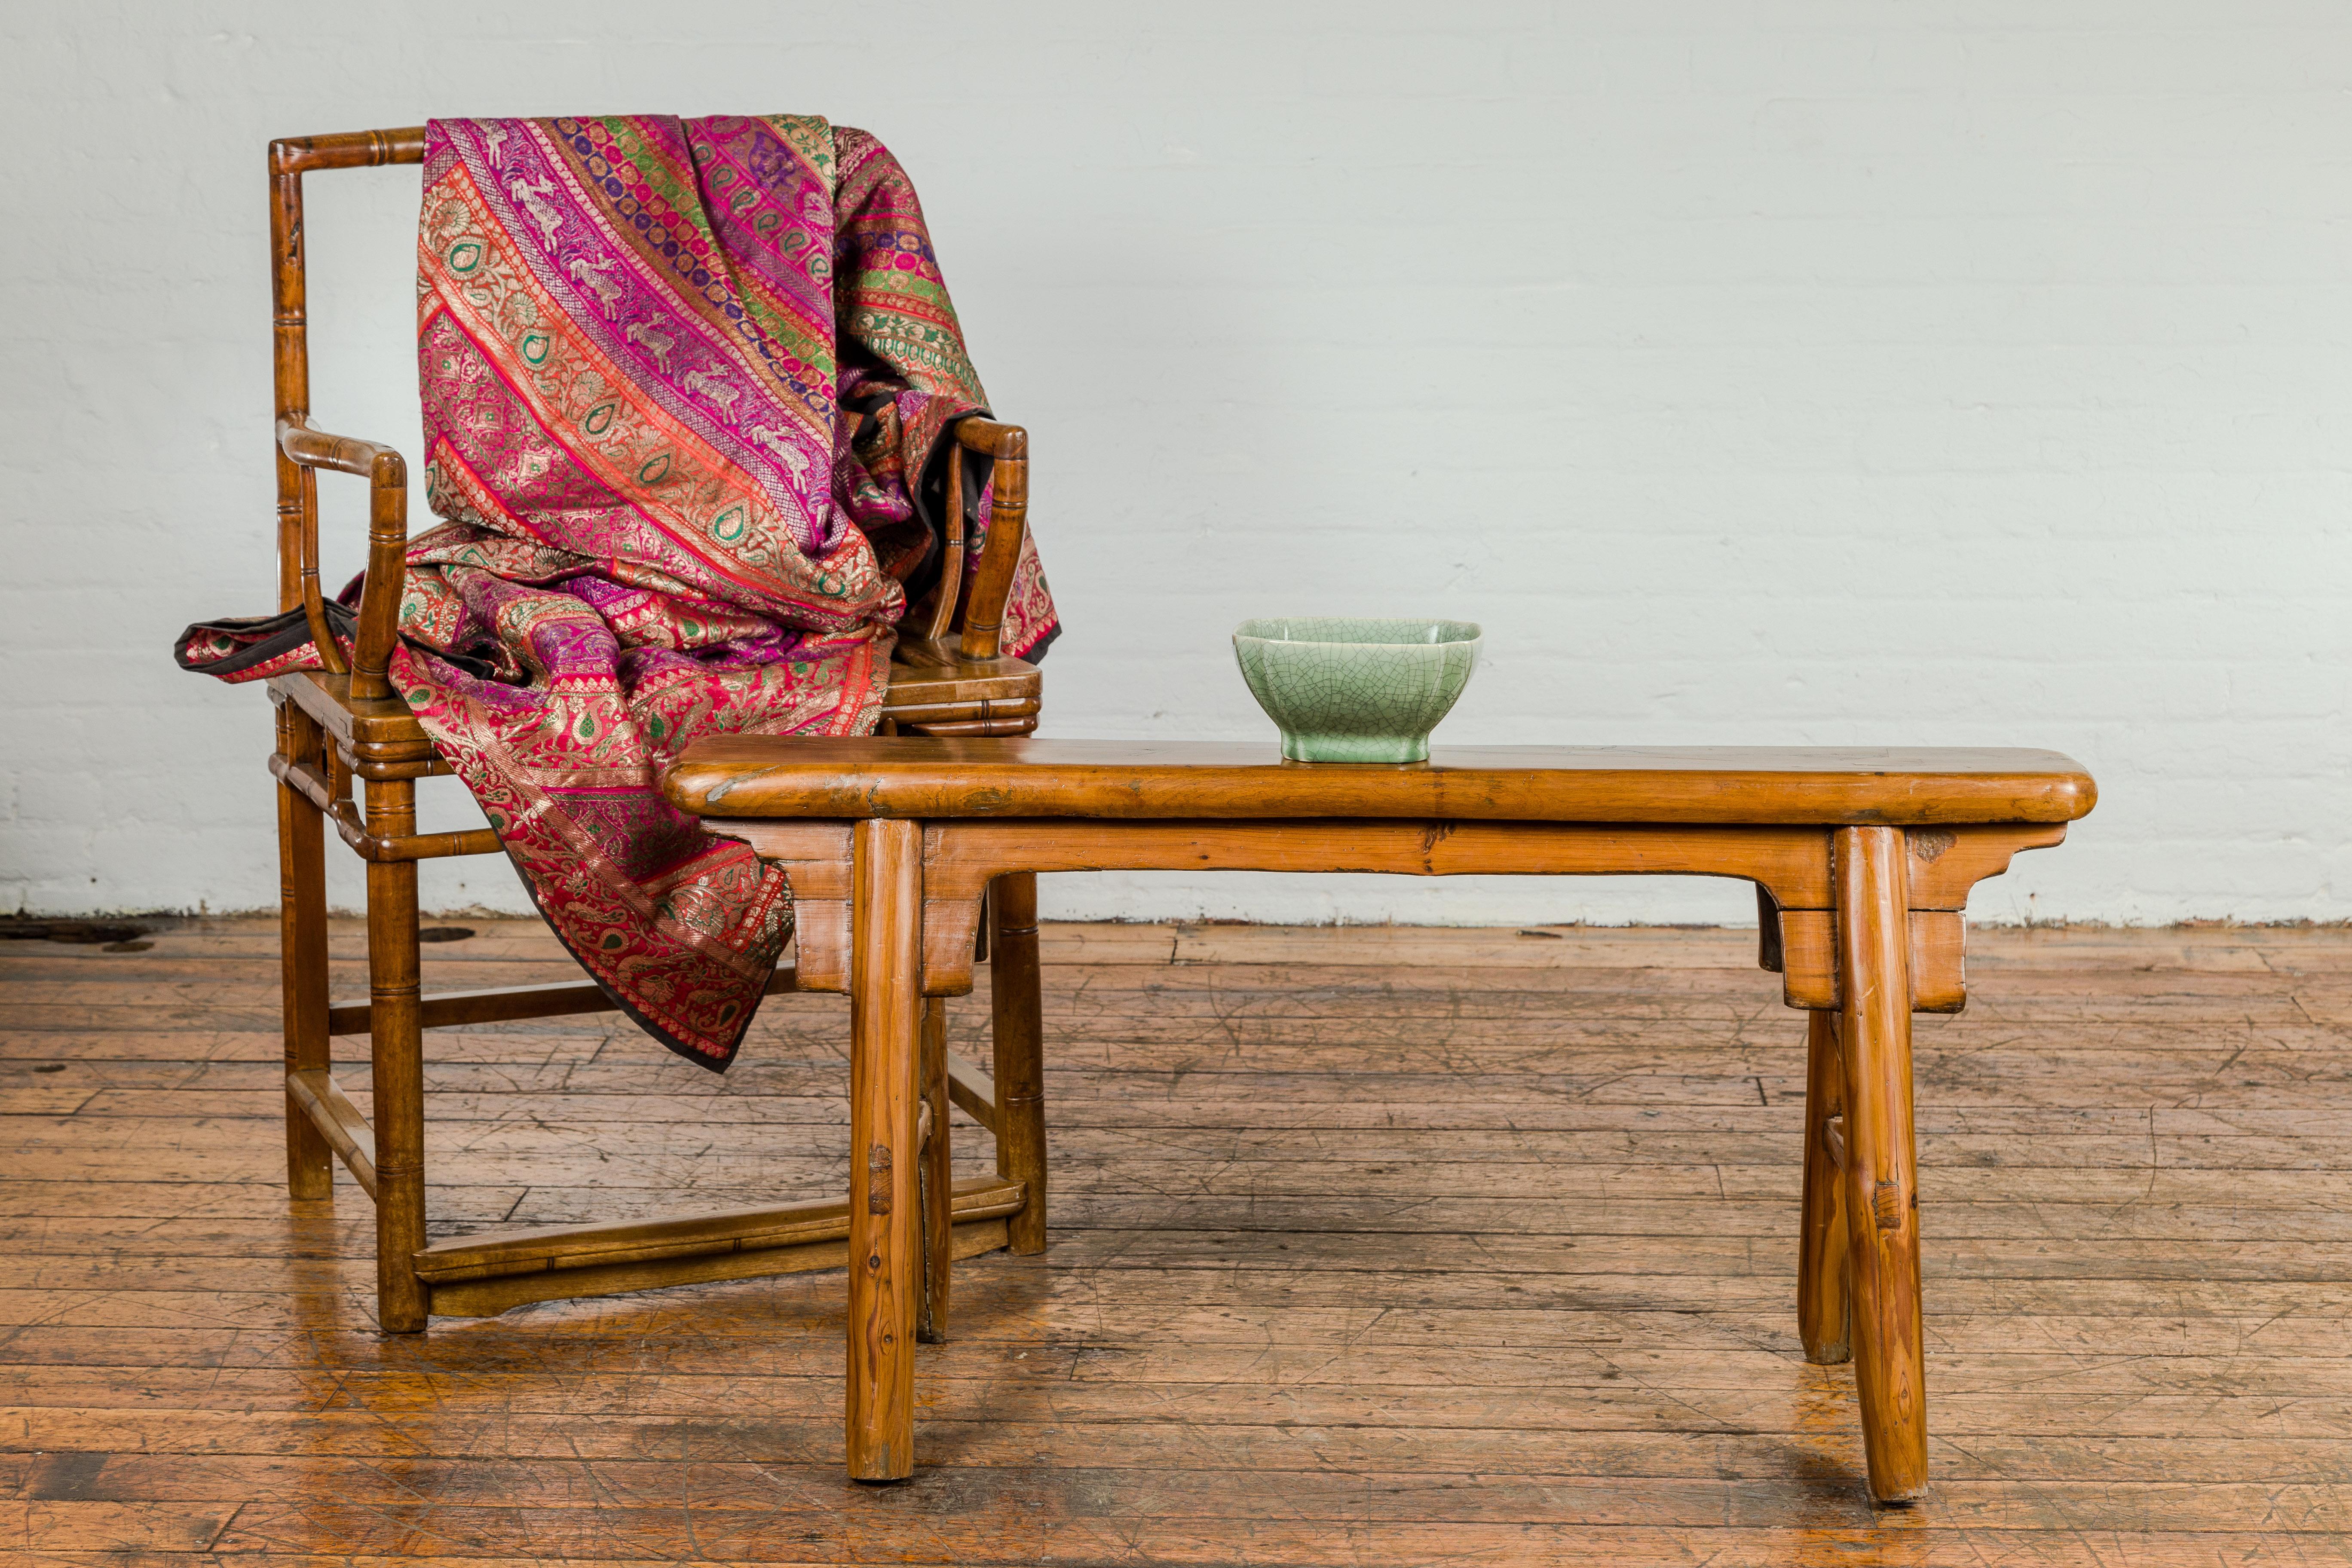 A small vintage A-Frame wooden bench from the mid 20th century with rustic appearance, splaying legs and double side stretchers. Exuding a timeless rustic charm, this small vintage A-Frame wooden bench from the mid 20th century is a delightful